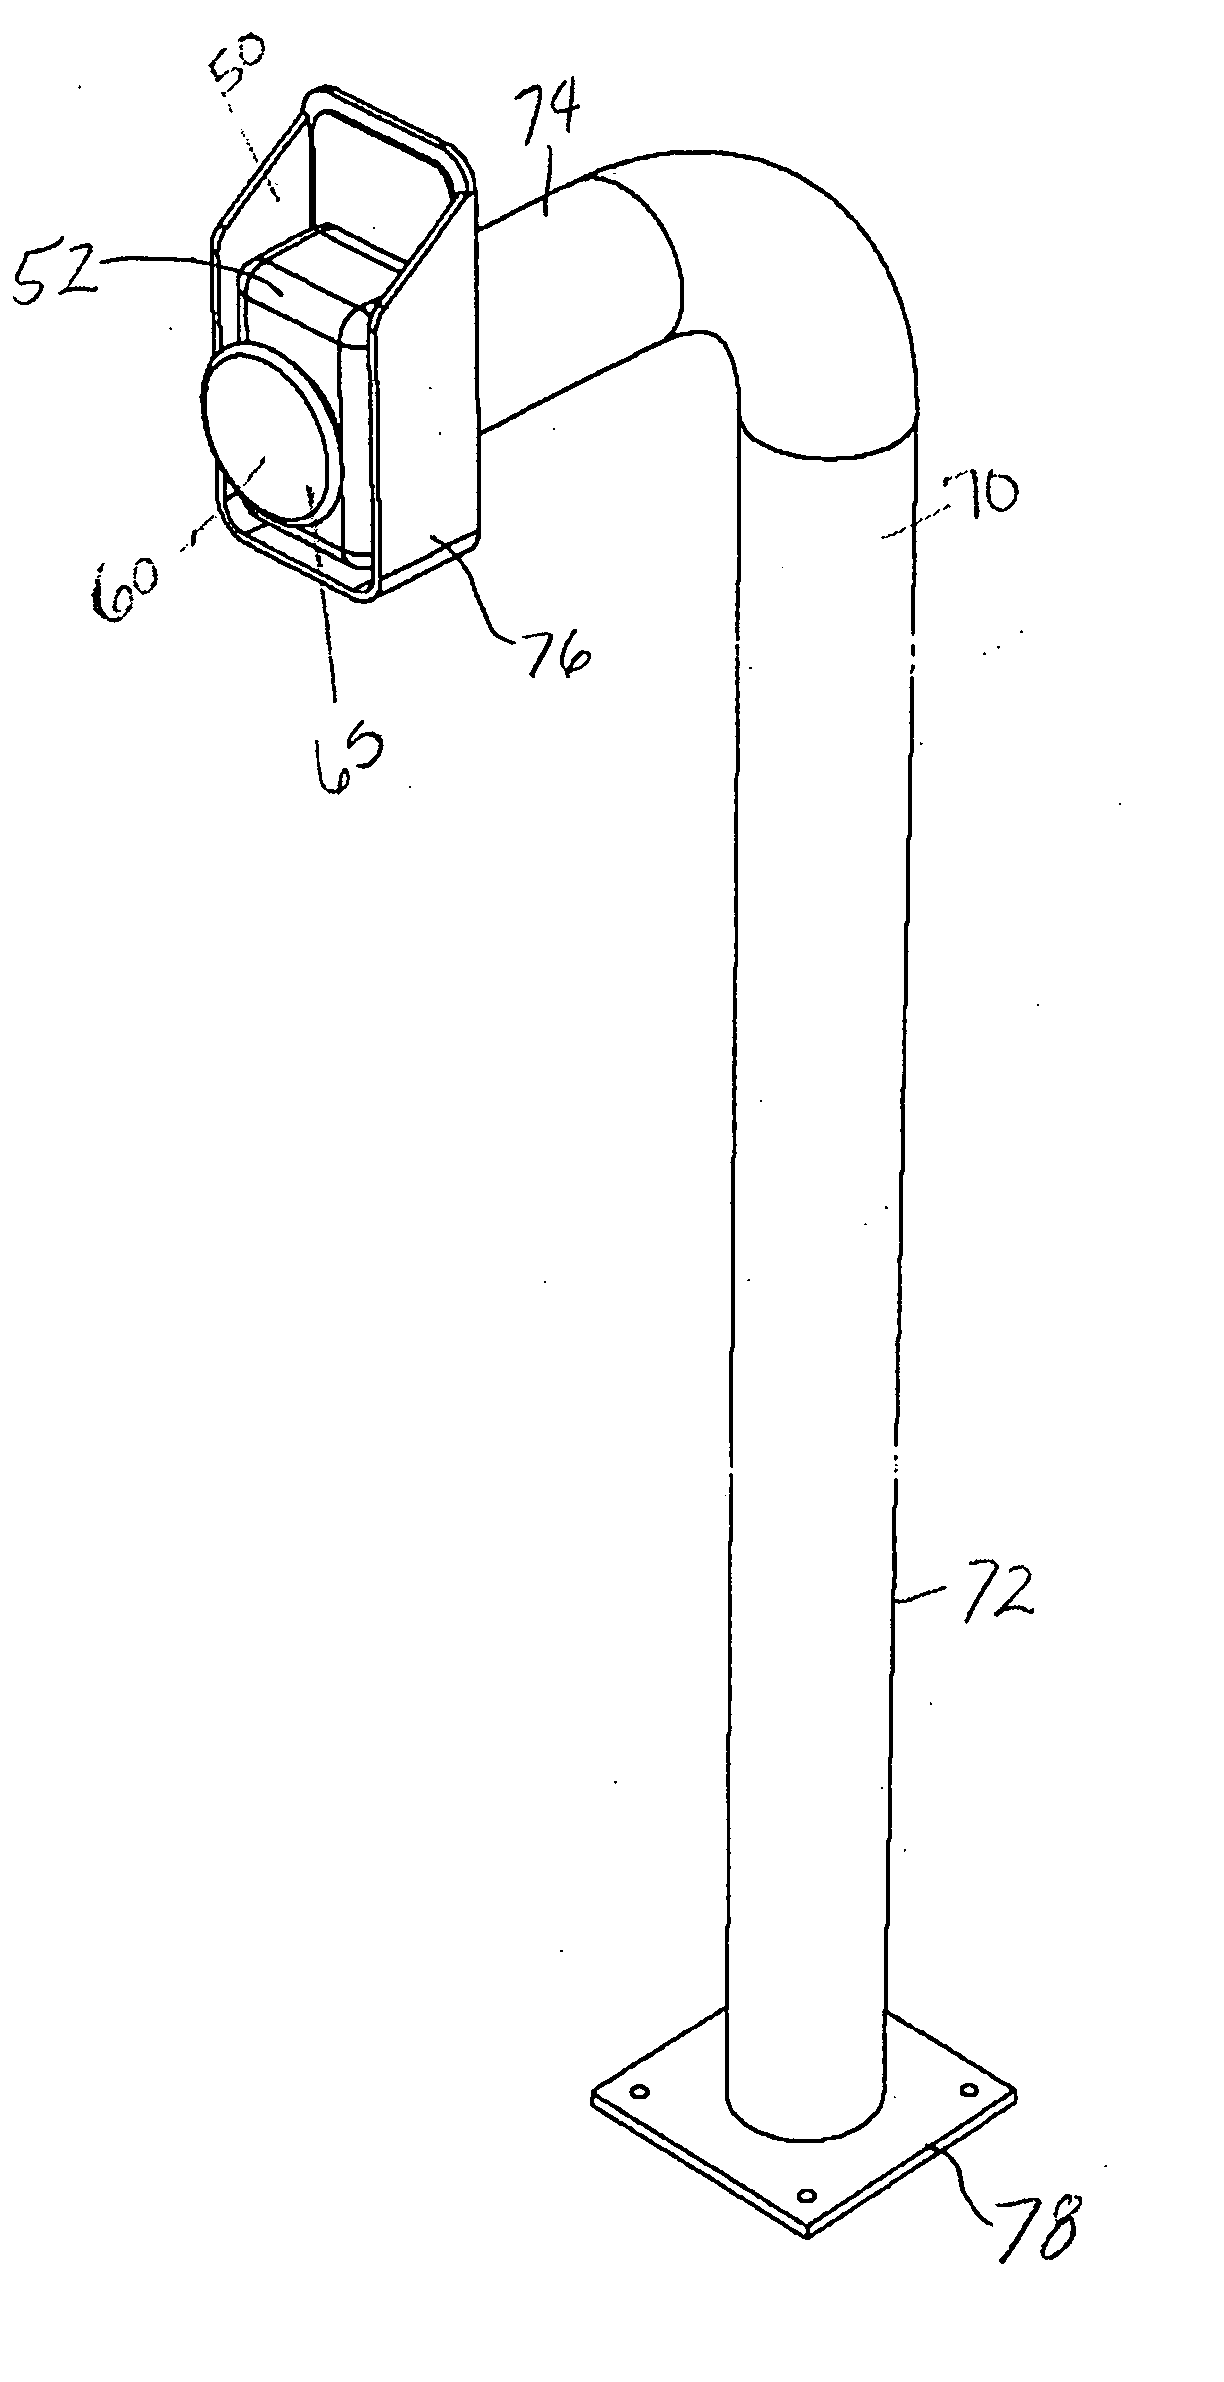 Method and apparatus for deaf and hard of hearing access to drive-through facilities